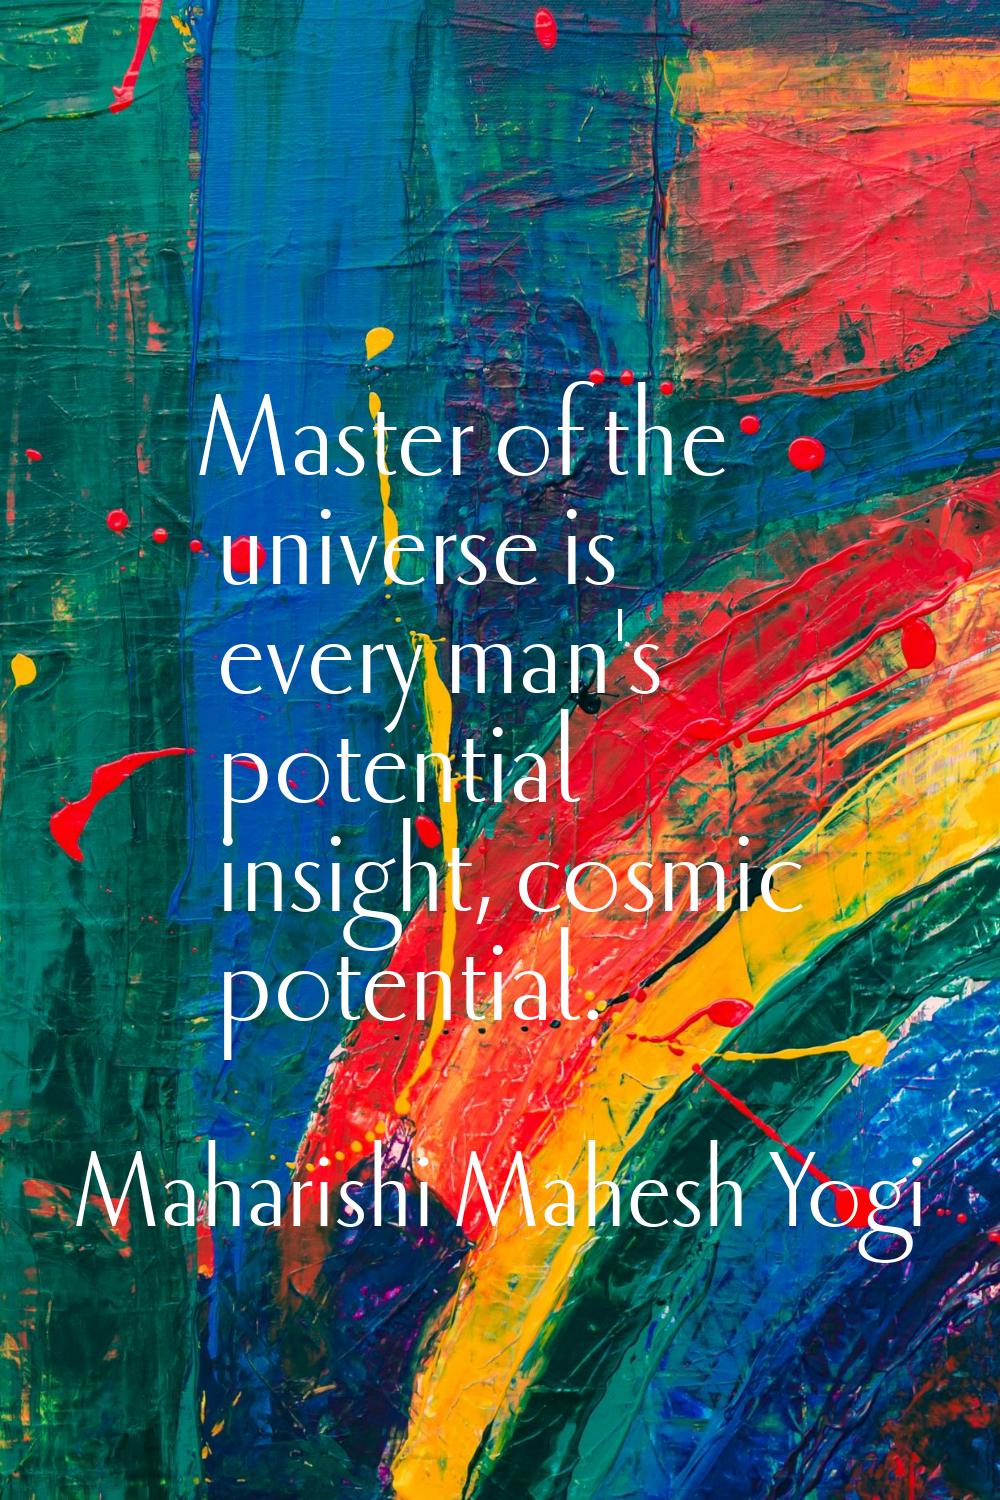 Master of the universe is every man's potential insight, cosmic potential.